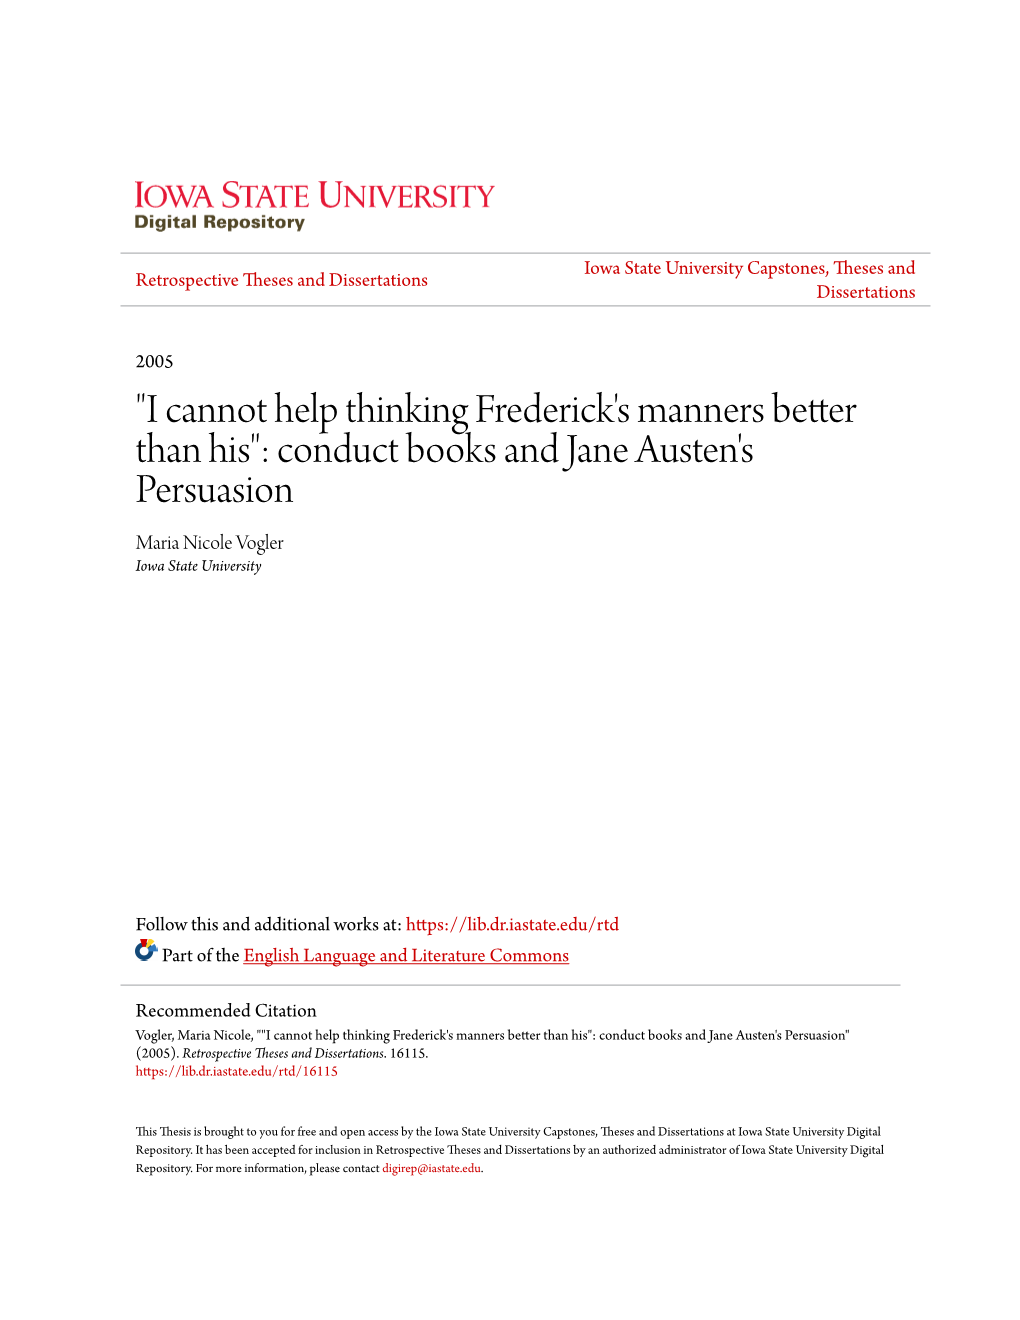 "I Cannot Help Thinking Frederick's Manners Better Than His": Conduct Books and Jane Austen's Persuasion Maria Nicole Vogler Iowa State University